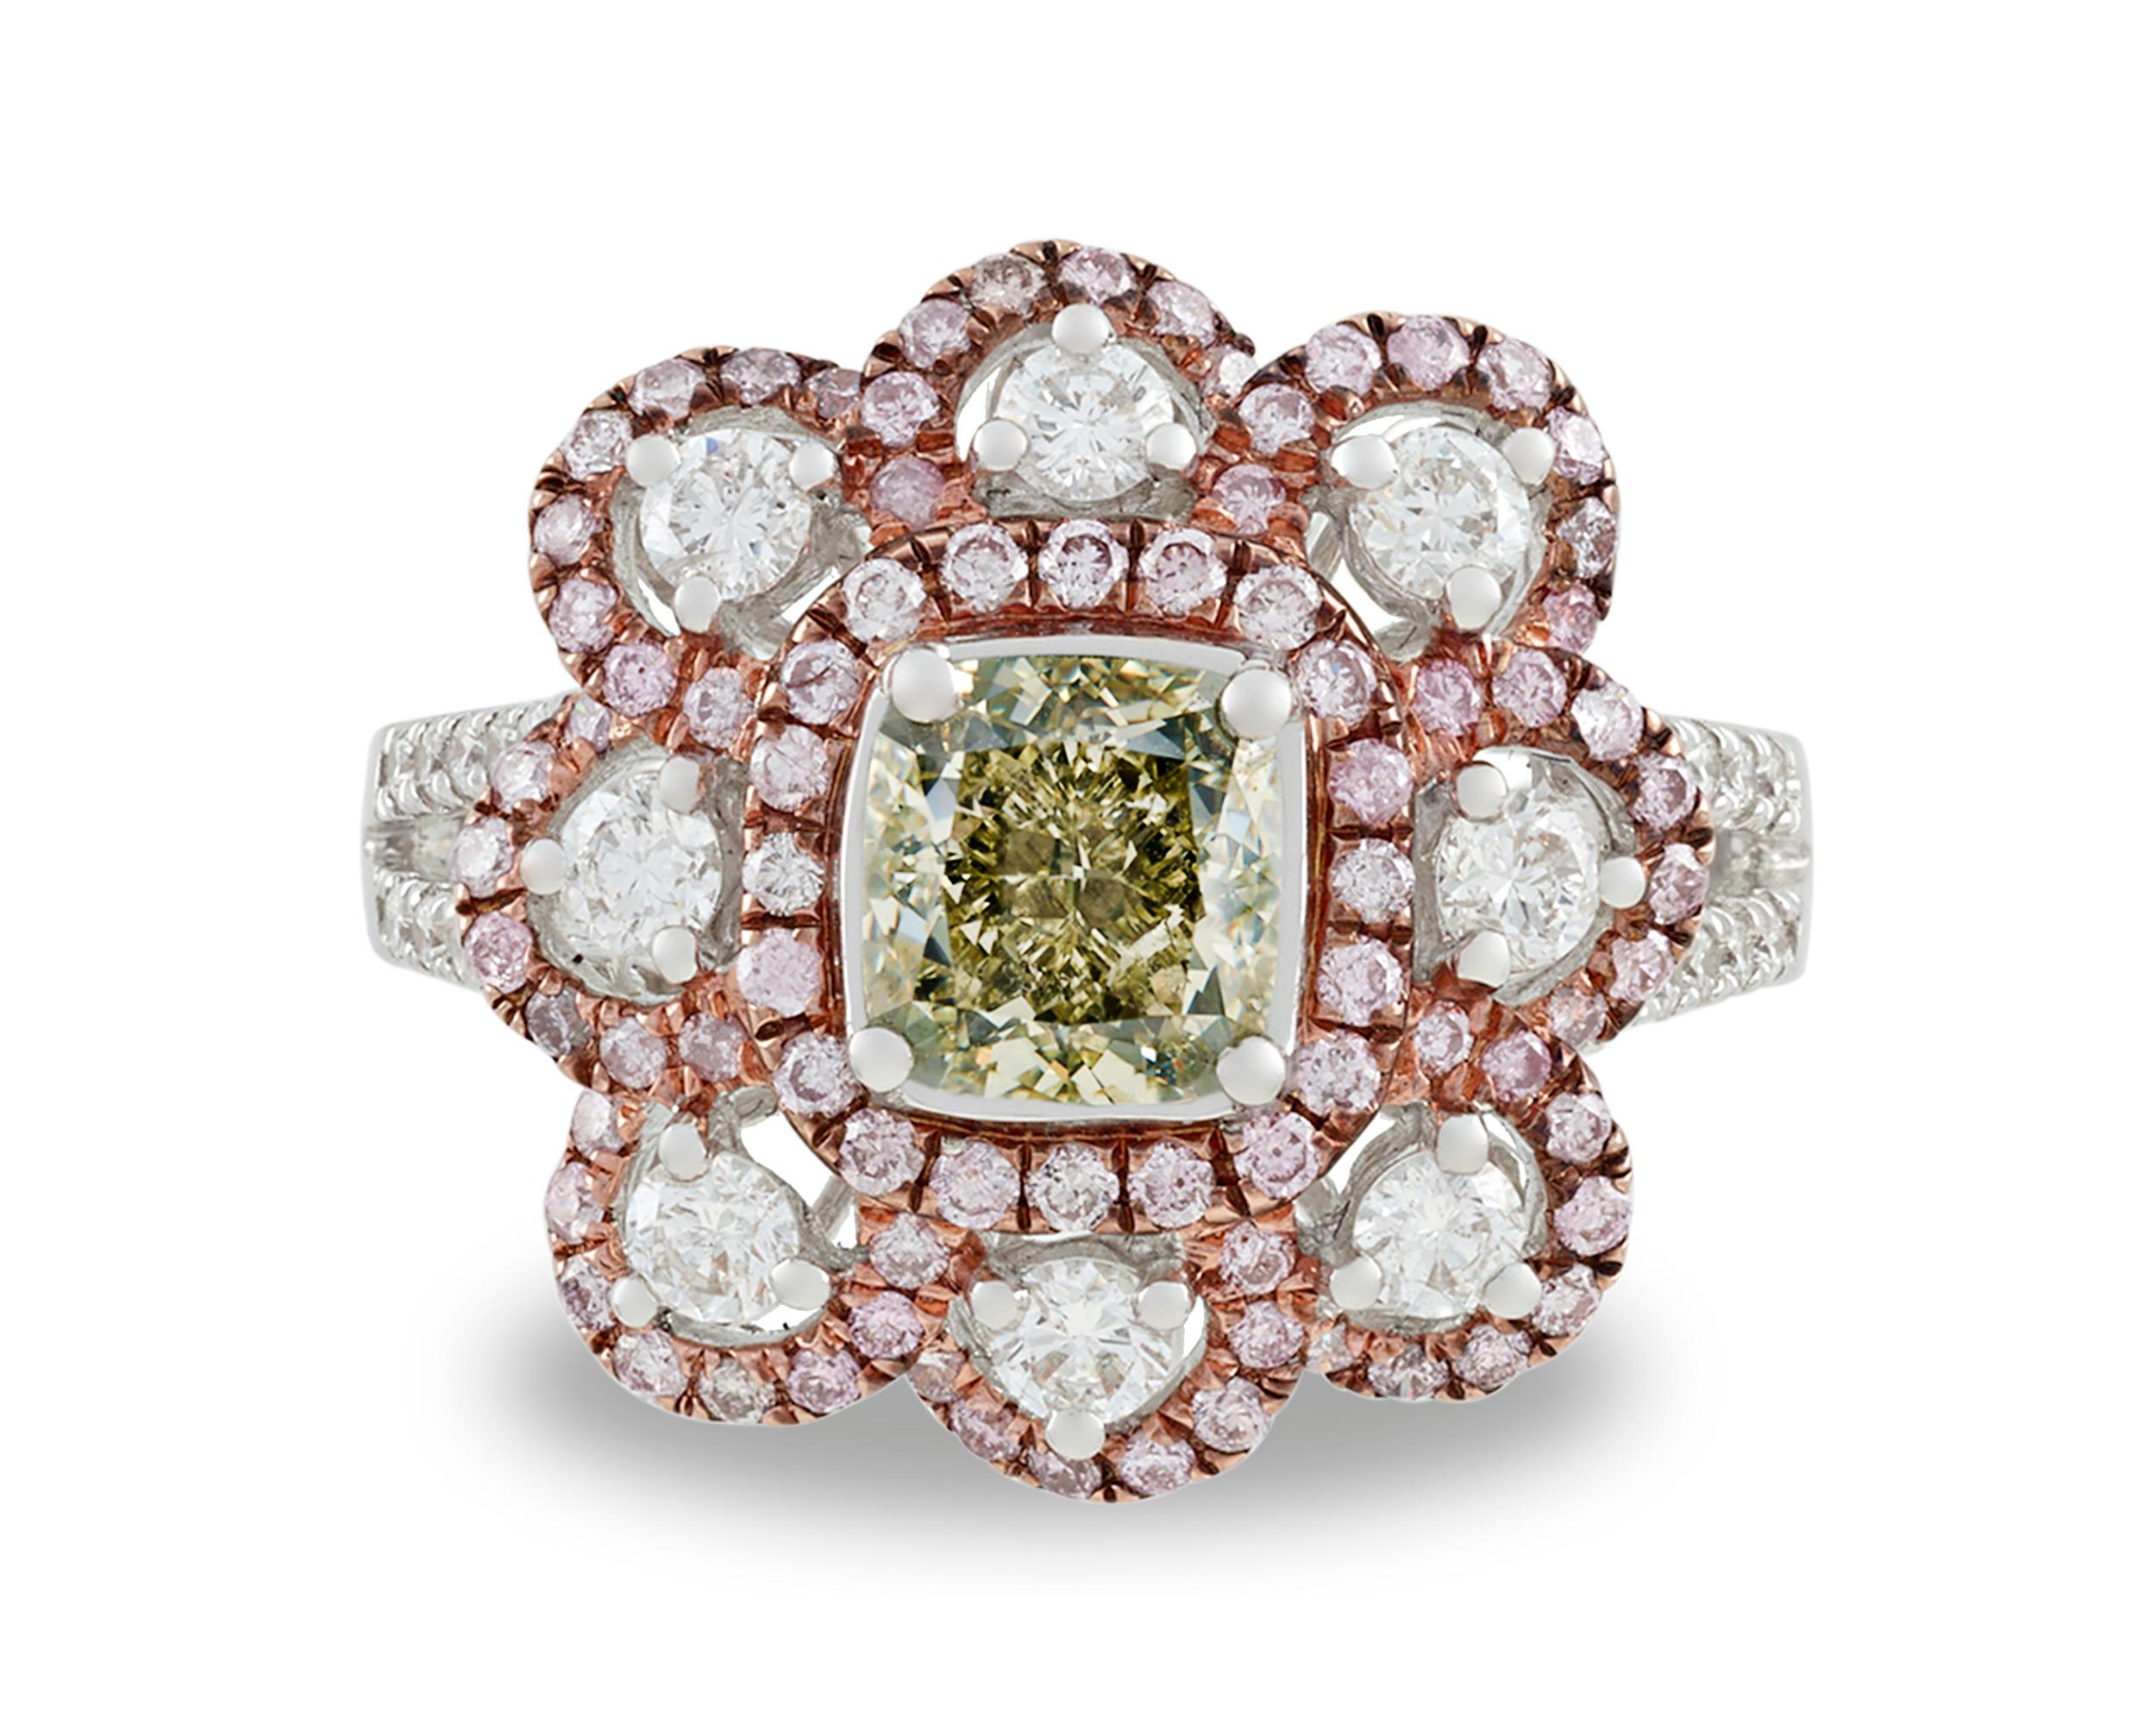 An exceptionally rare 1.50-carat fancy grayish greenish yellow diamond captivates the eye in this floral ring. Diamonds with a green hue are among the most coveted of all colored diamonds, prized for both their rarity and beauty. The delicate hue of